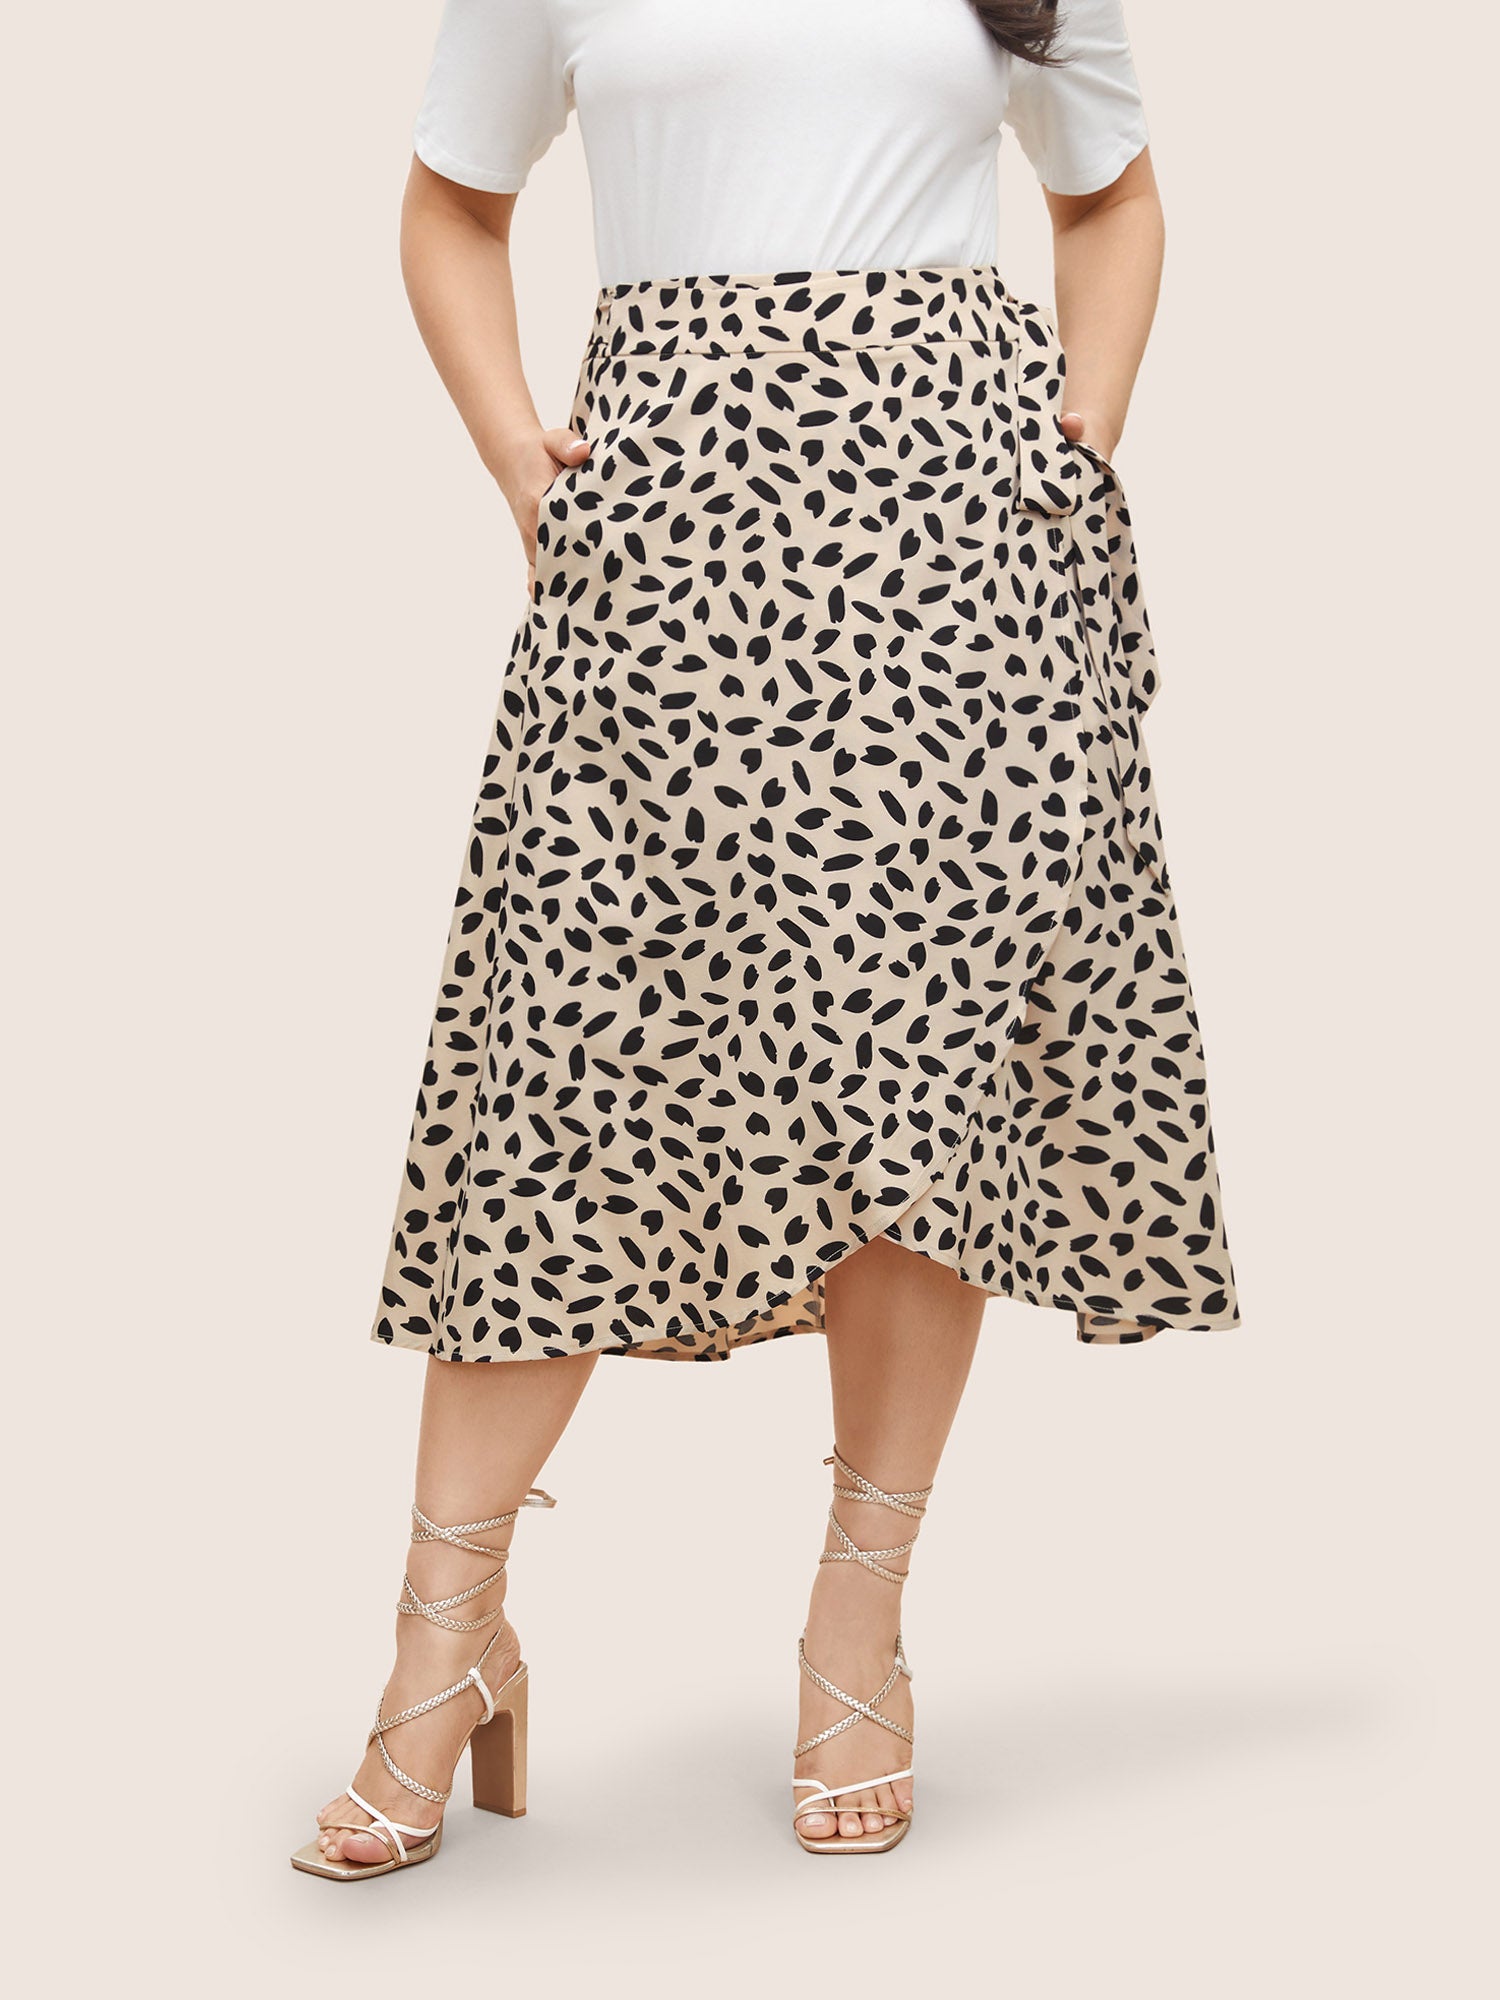 Graphic Ties Knotted Wrap Hem Skirt